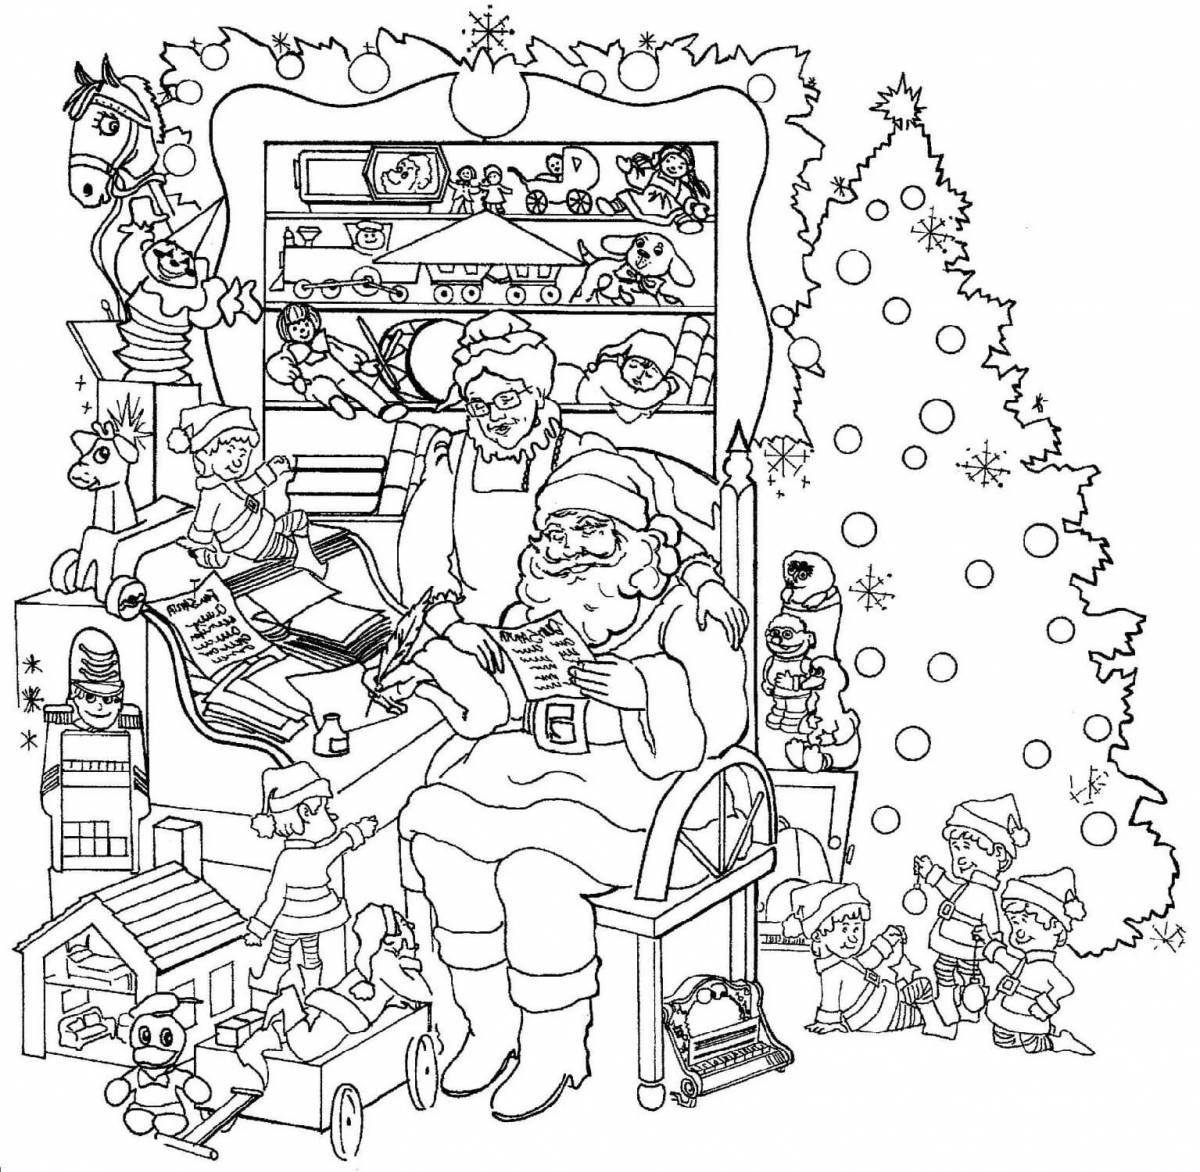 Exquisite christmas coloring book